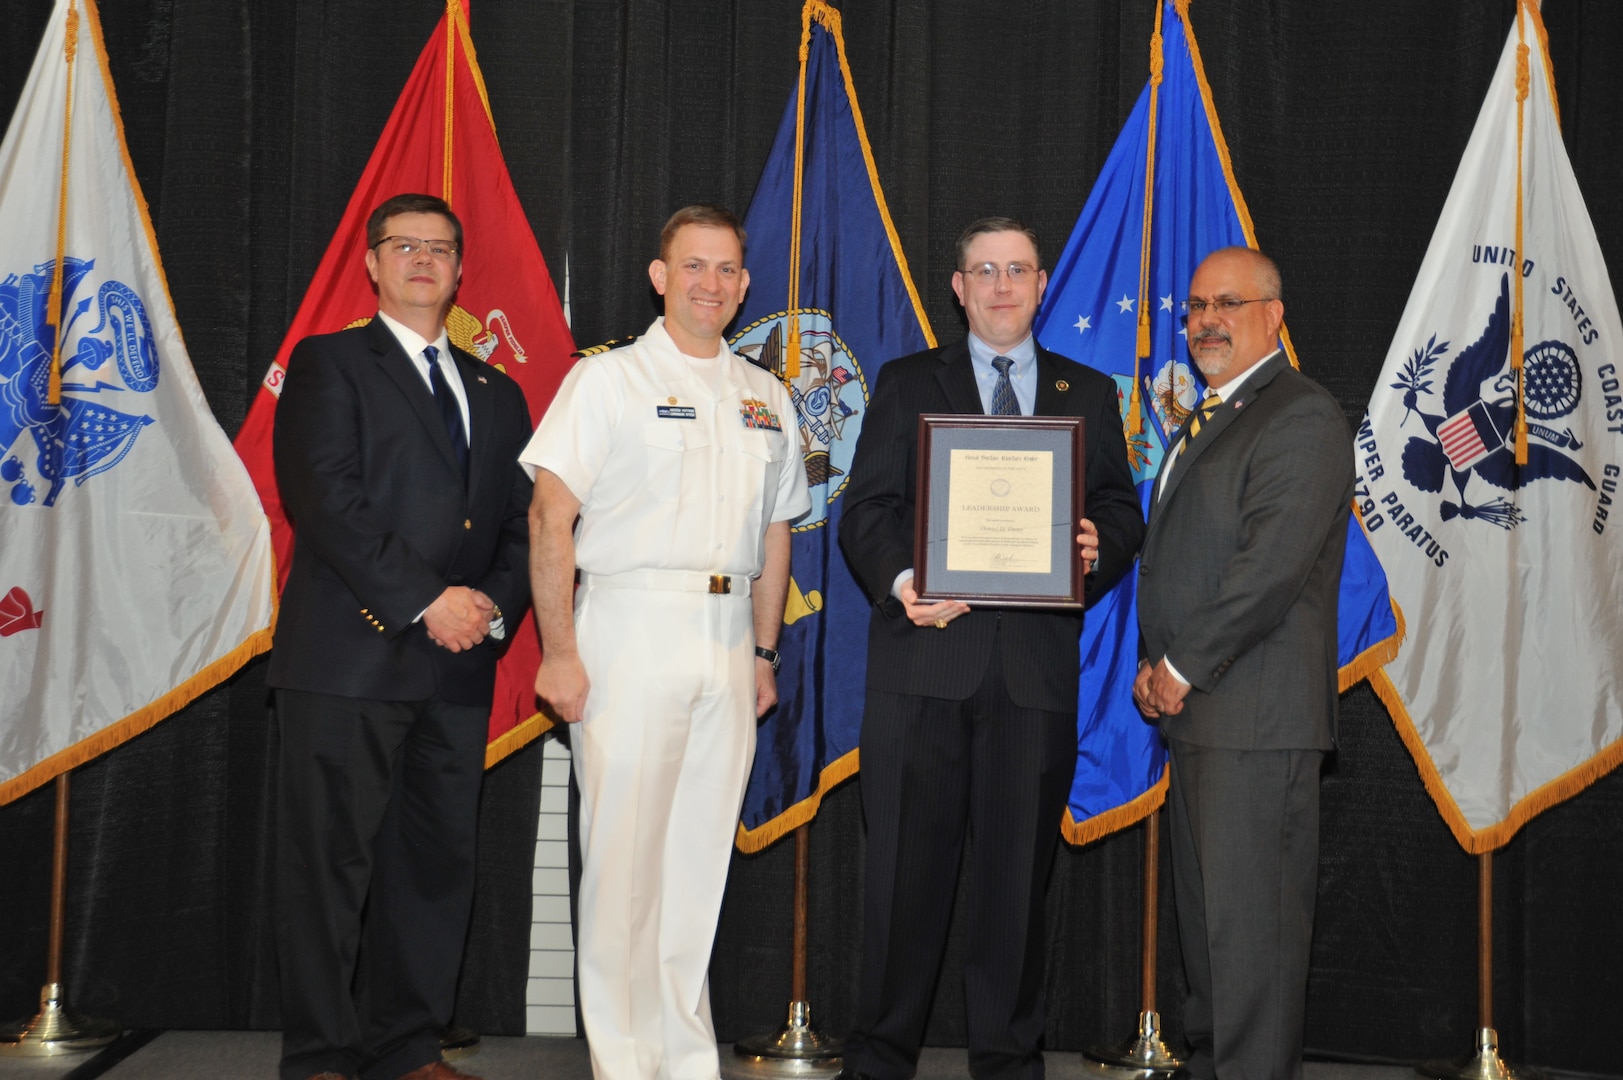 IMAGE: Daniel Dunn is presented the Leadership Award at Naval Surface Warfare Center Dahlgren Division's annual awards ceremony, Apr. 26 at the Fredericksburg Expo and Conference Center.